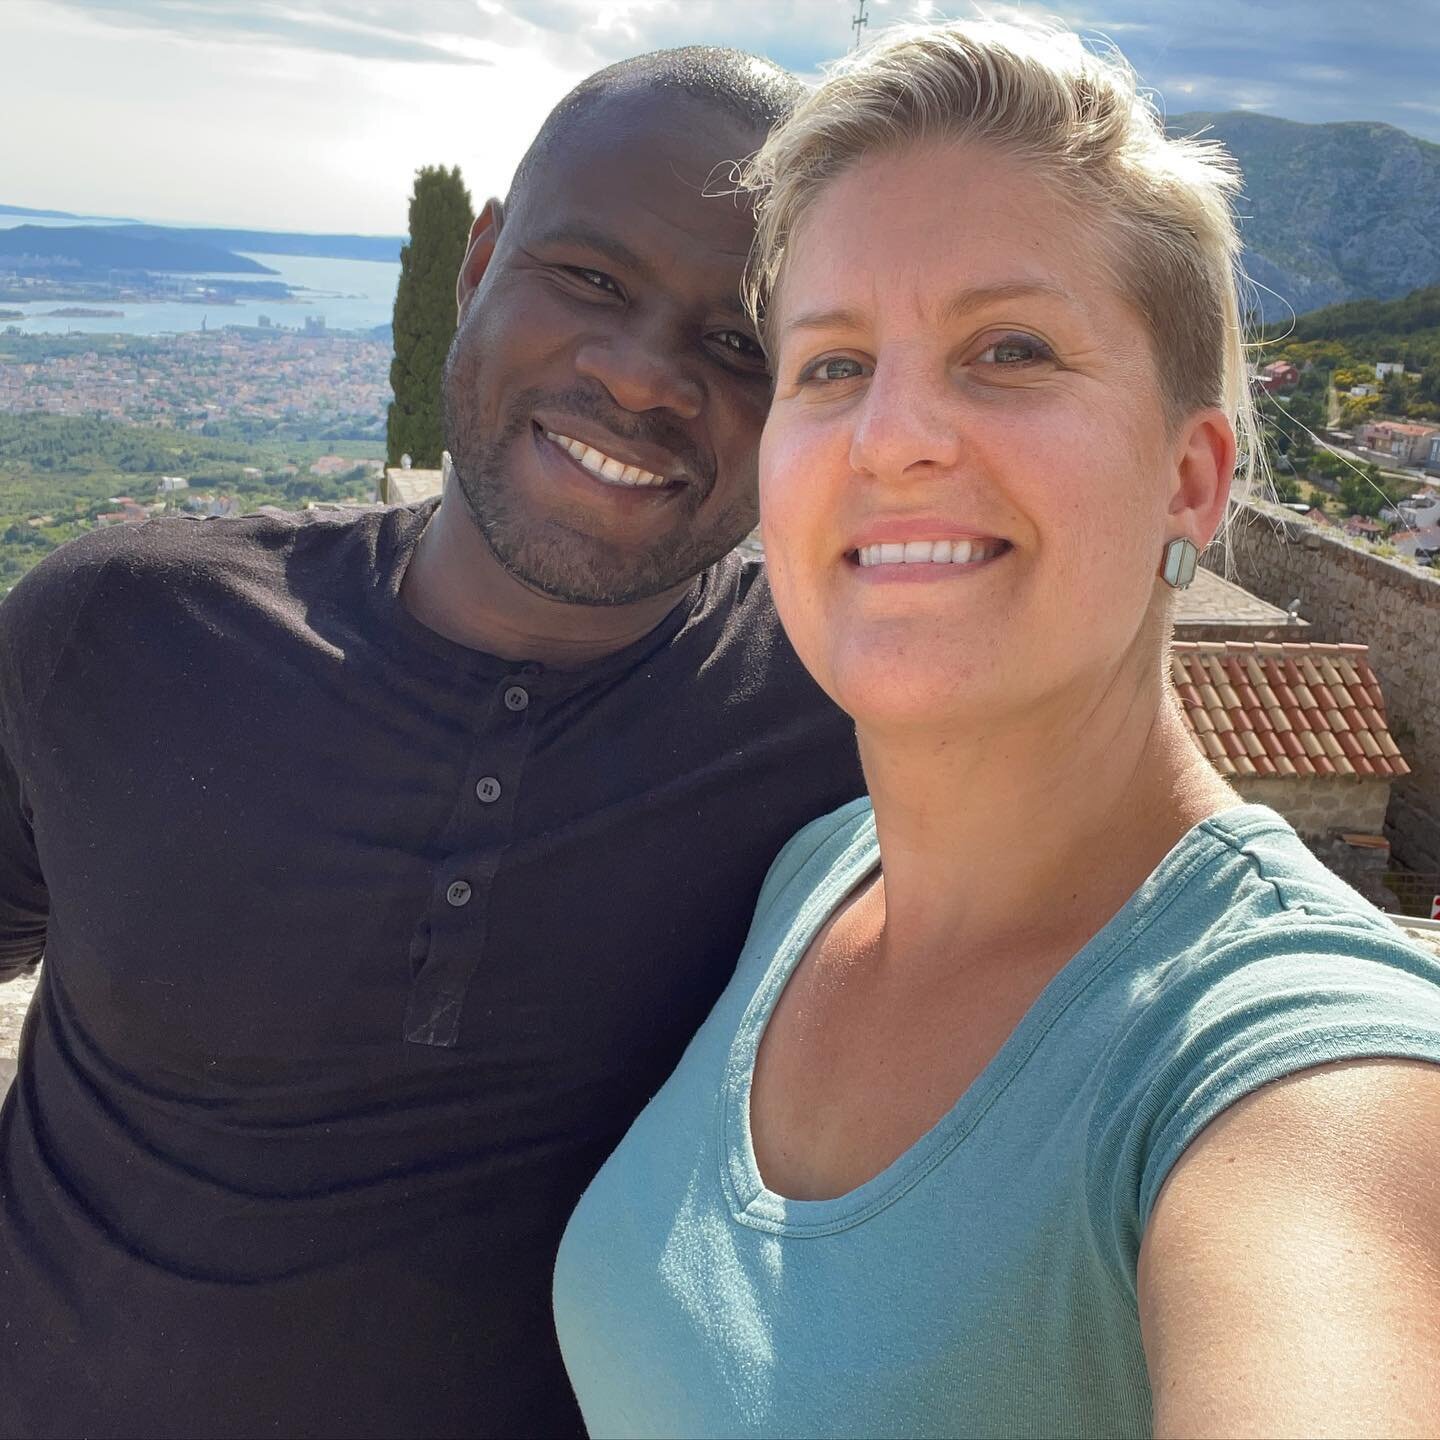 Happy Sunday from Croatia 🇭🇷 

We enjoyed 4 sunny days in the coastal city of Split, Croatia hiking, eating and exploring as much as we could fit in.

We walked to @klisfortress which has lots of history and was the setting of City of Mereen for Go